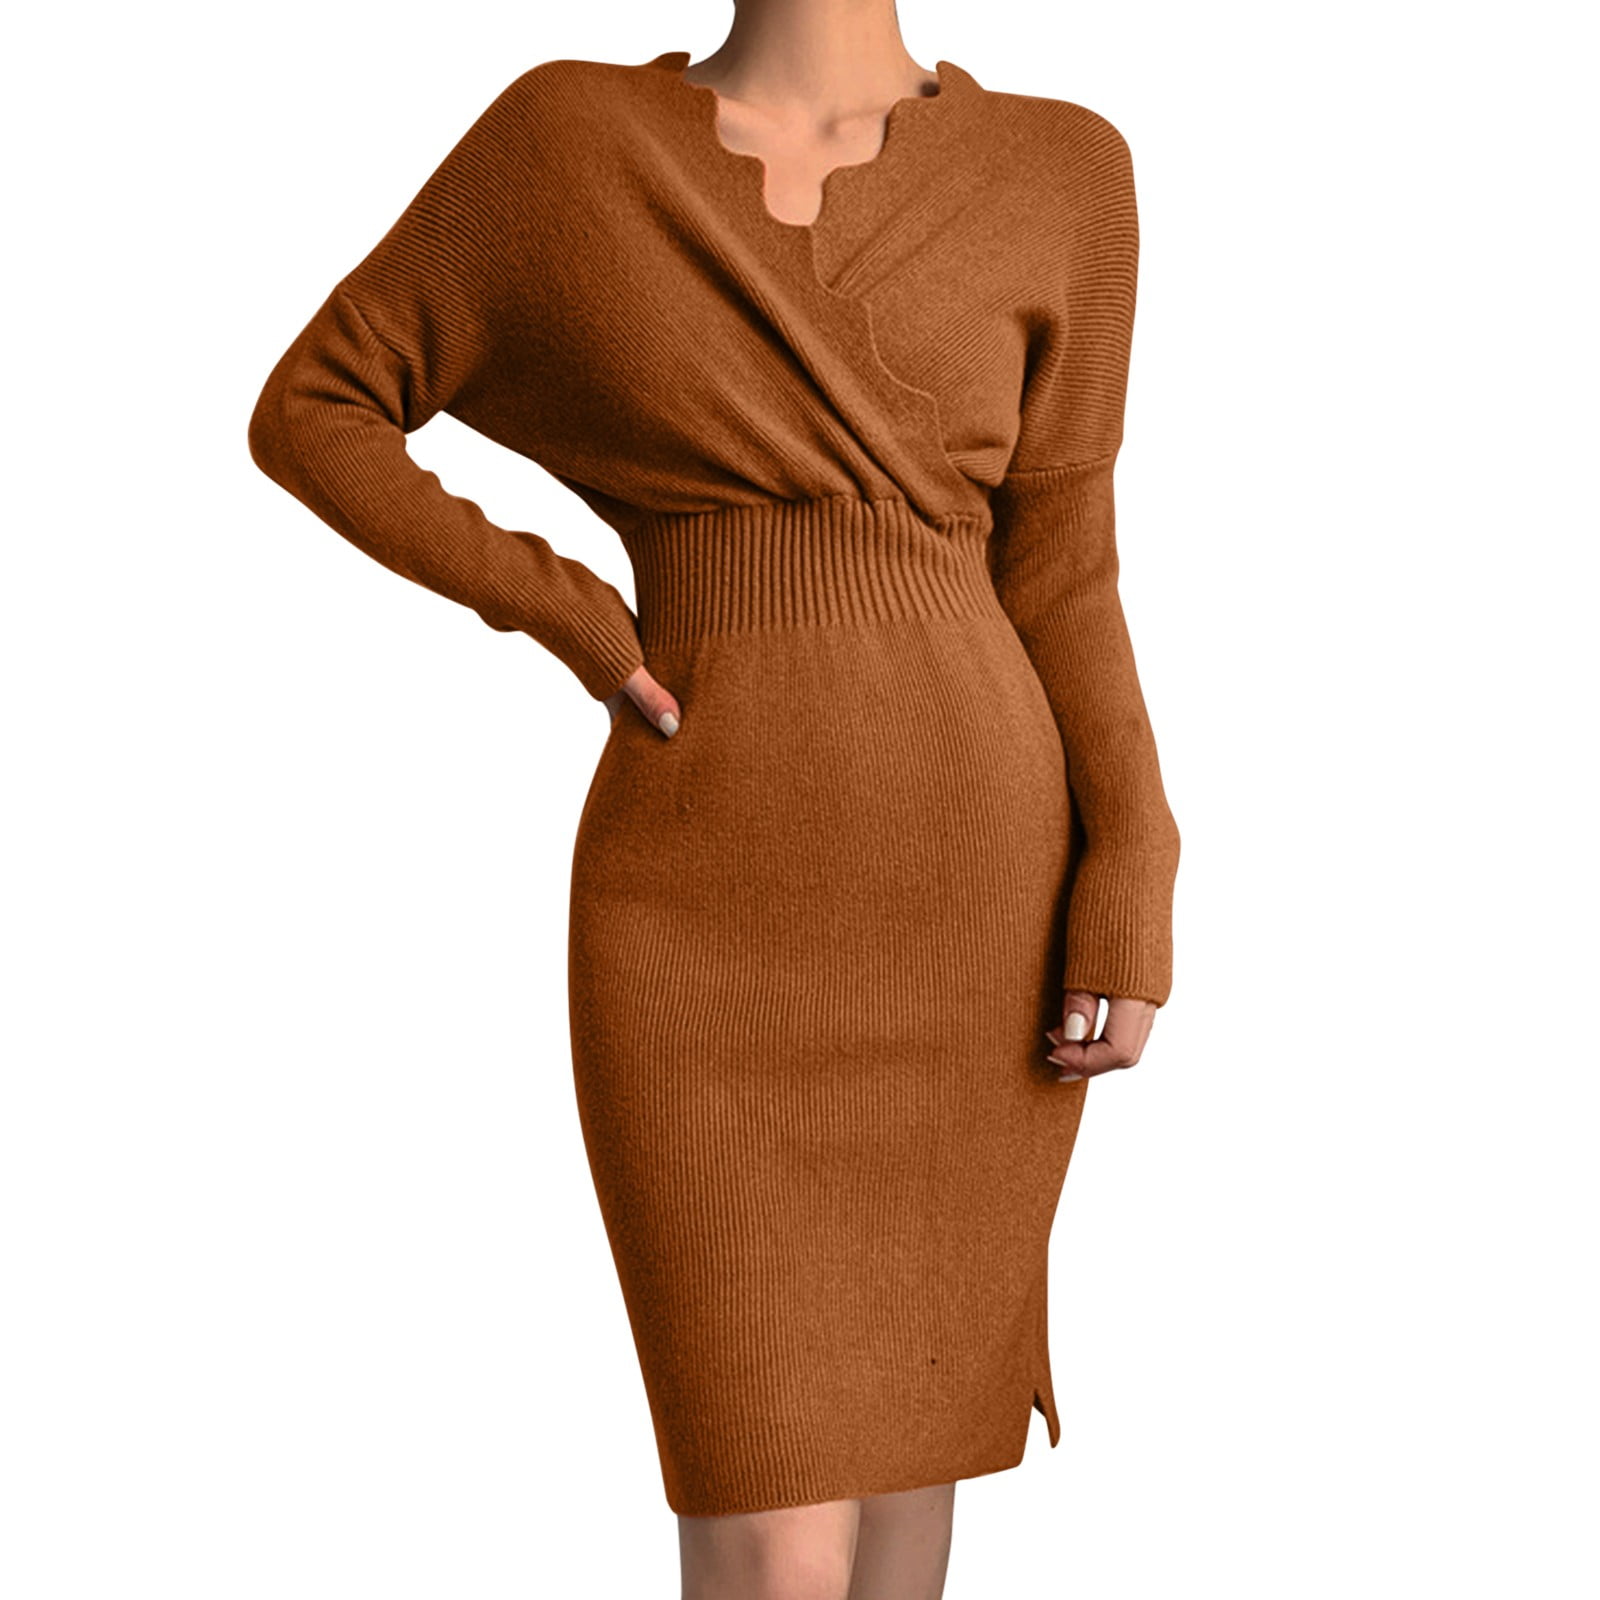 File:Turtleneck Bodycon Sweater Dress, Lace Tights, Gold Choker